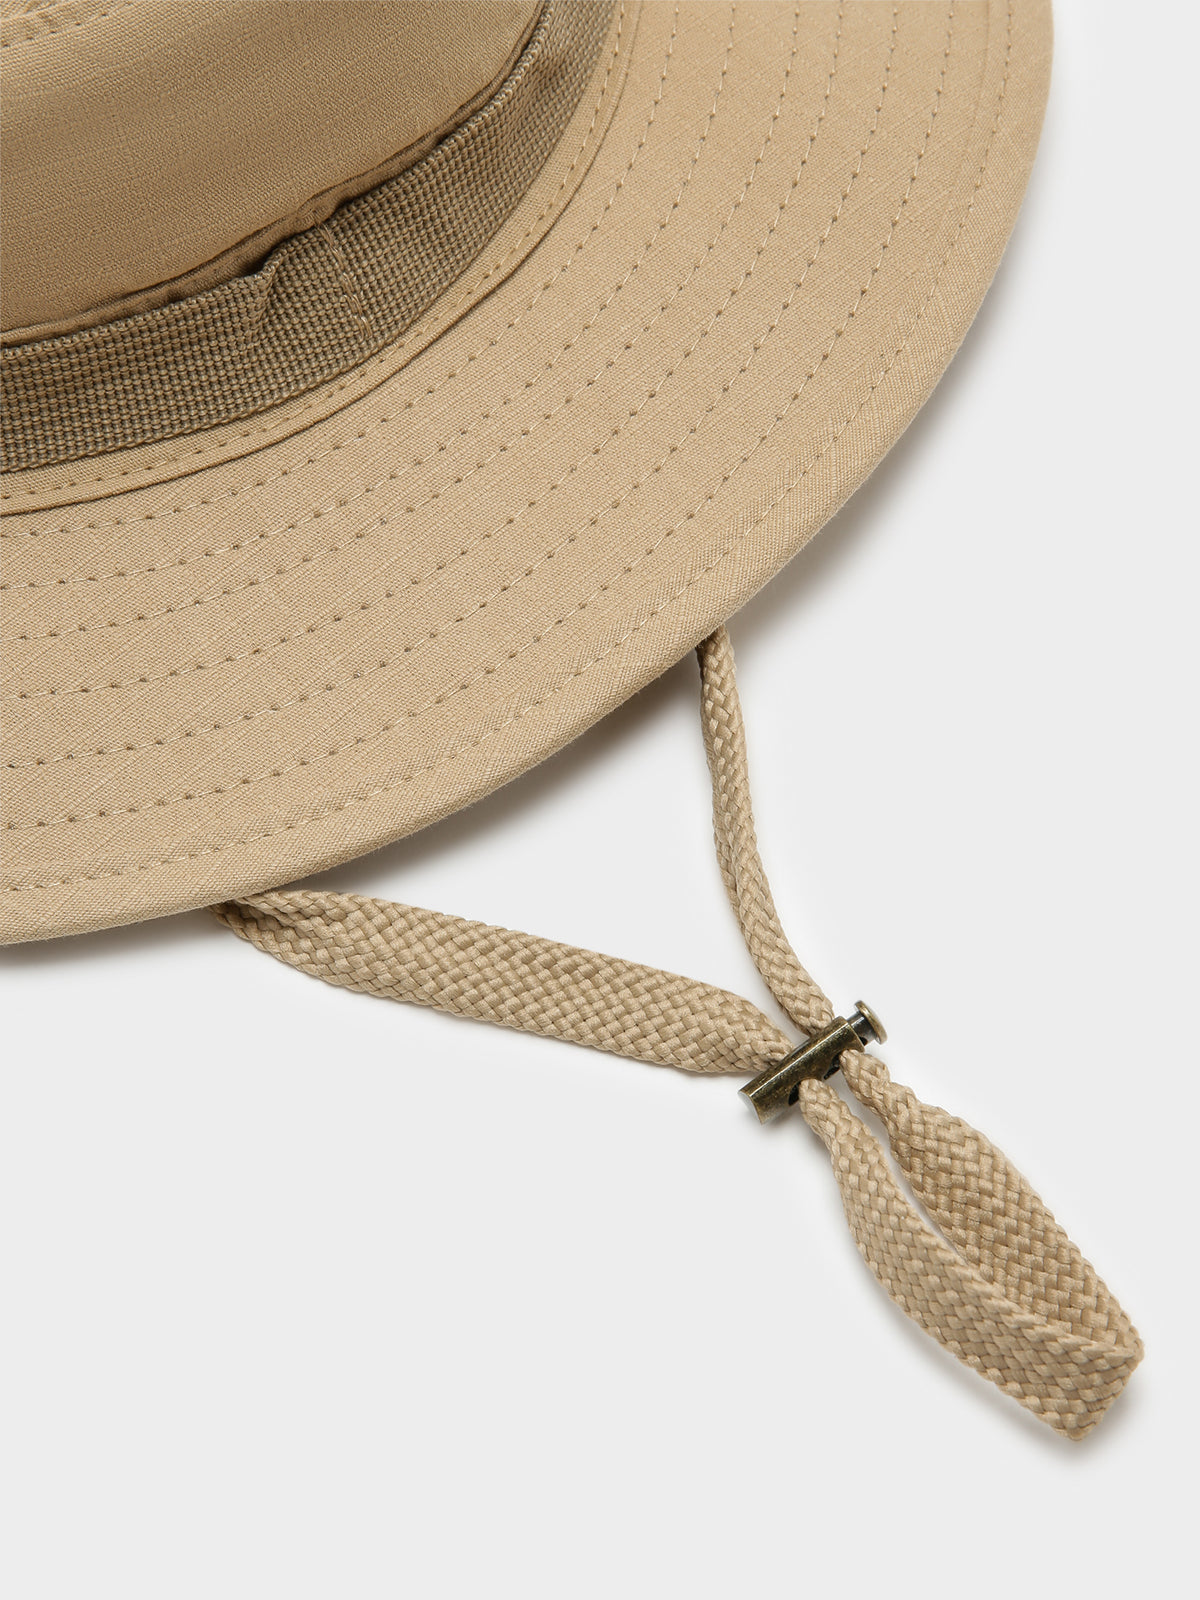 Crowds Boonie Hat in Washed Tan